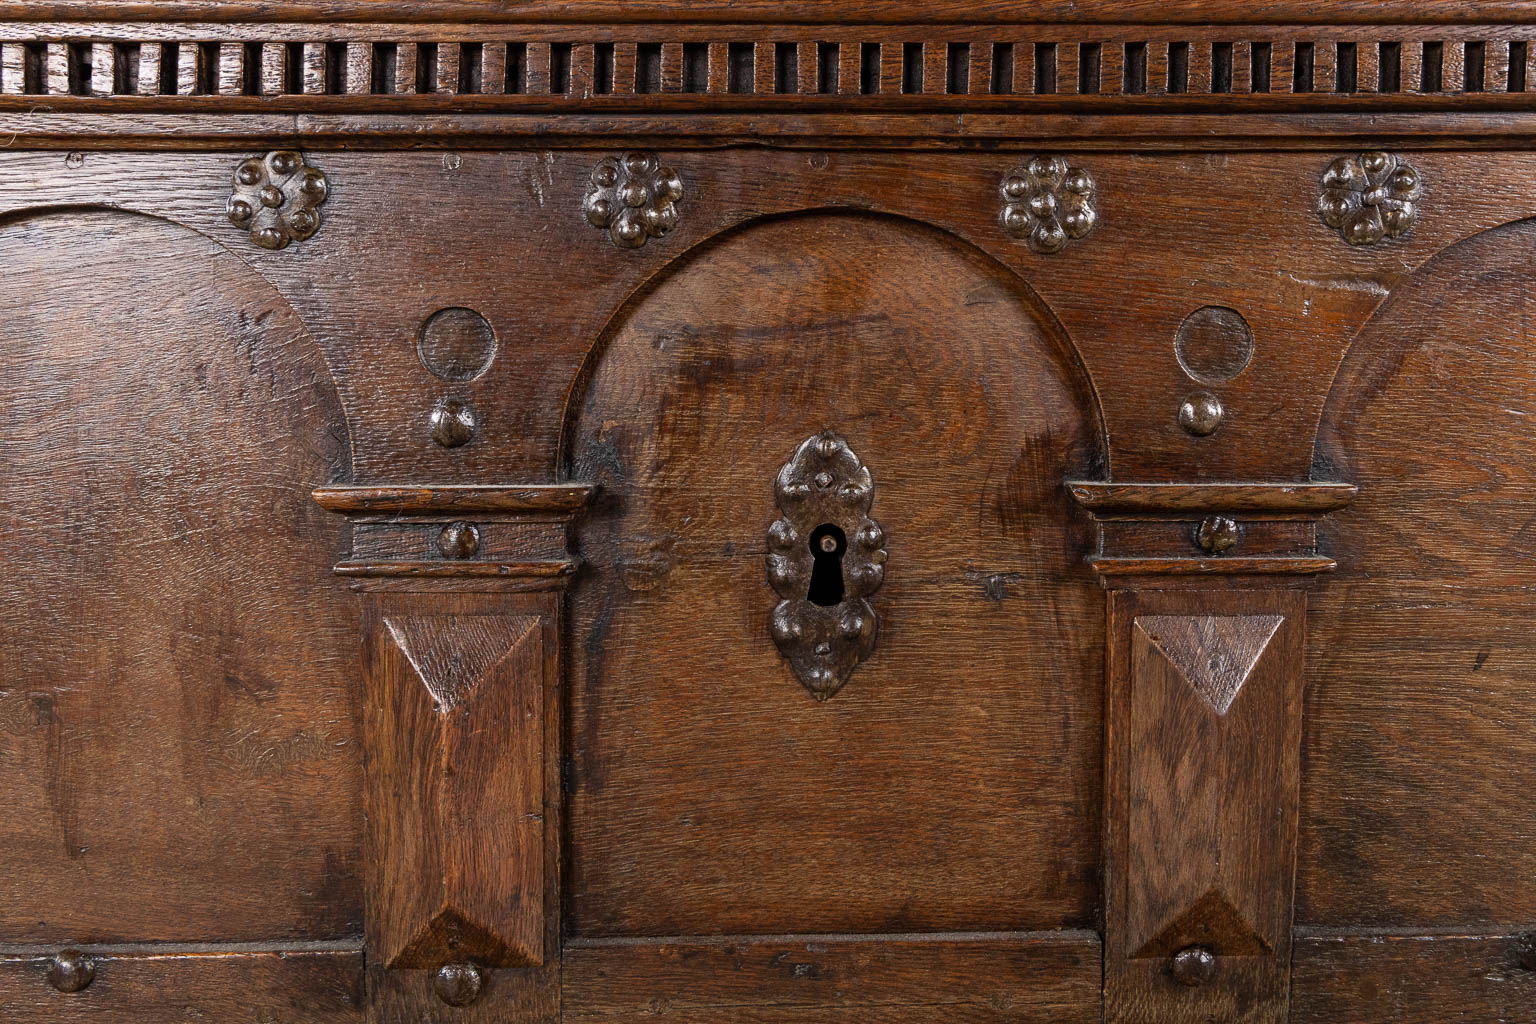 An antique chest mounted with wrought-iron, The Netherlands, 17th C. (L:57 x W:97 x H:56 cm) - Image 9 of 11